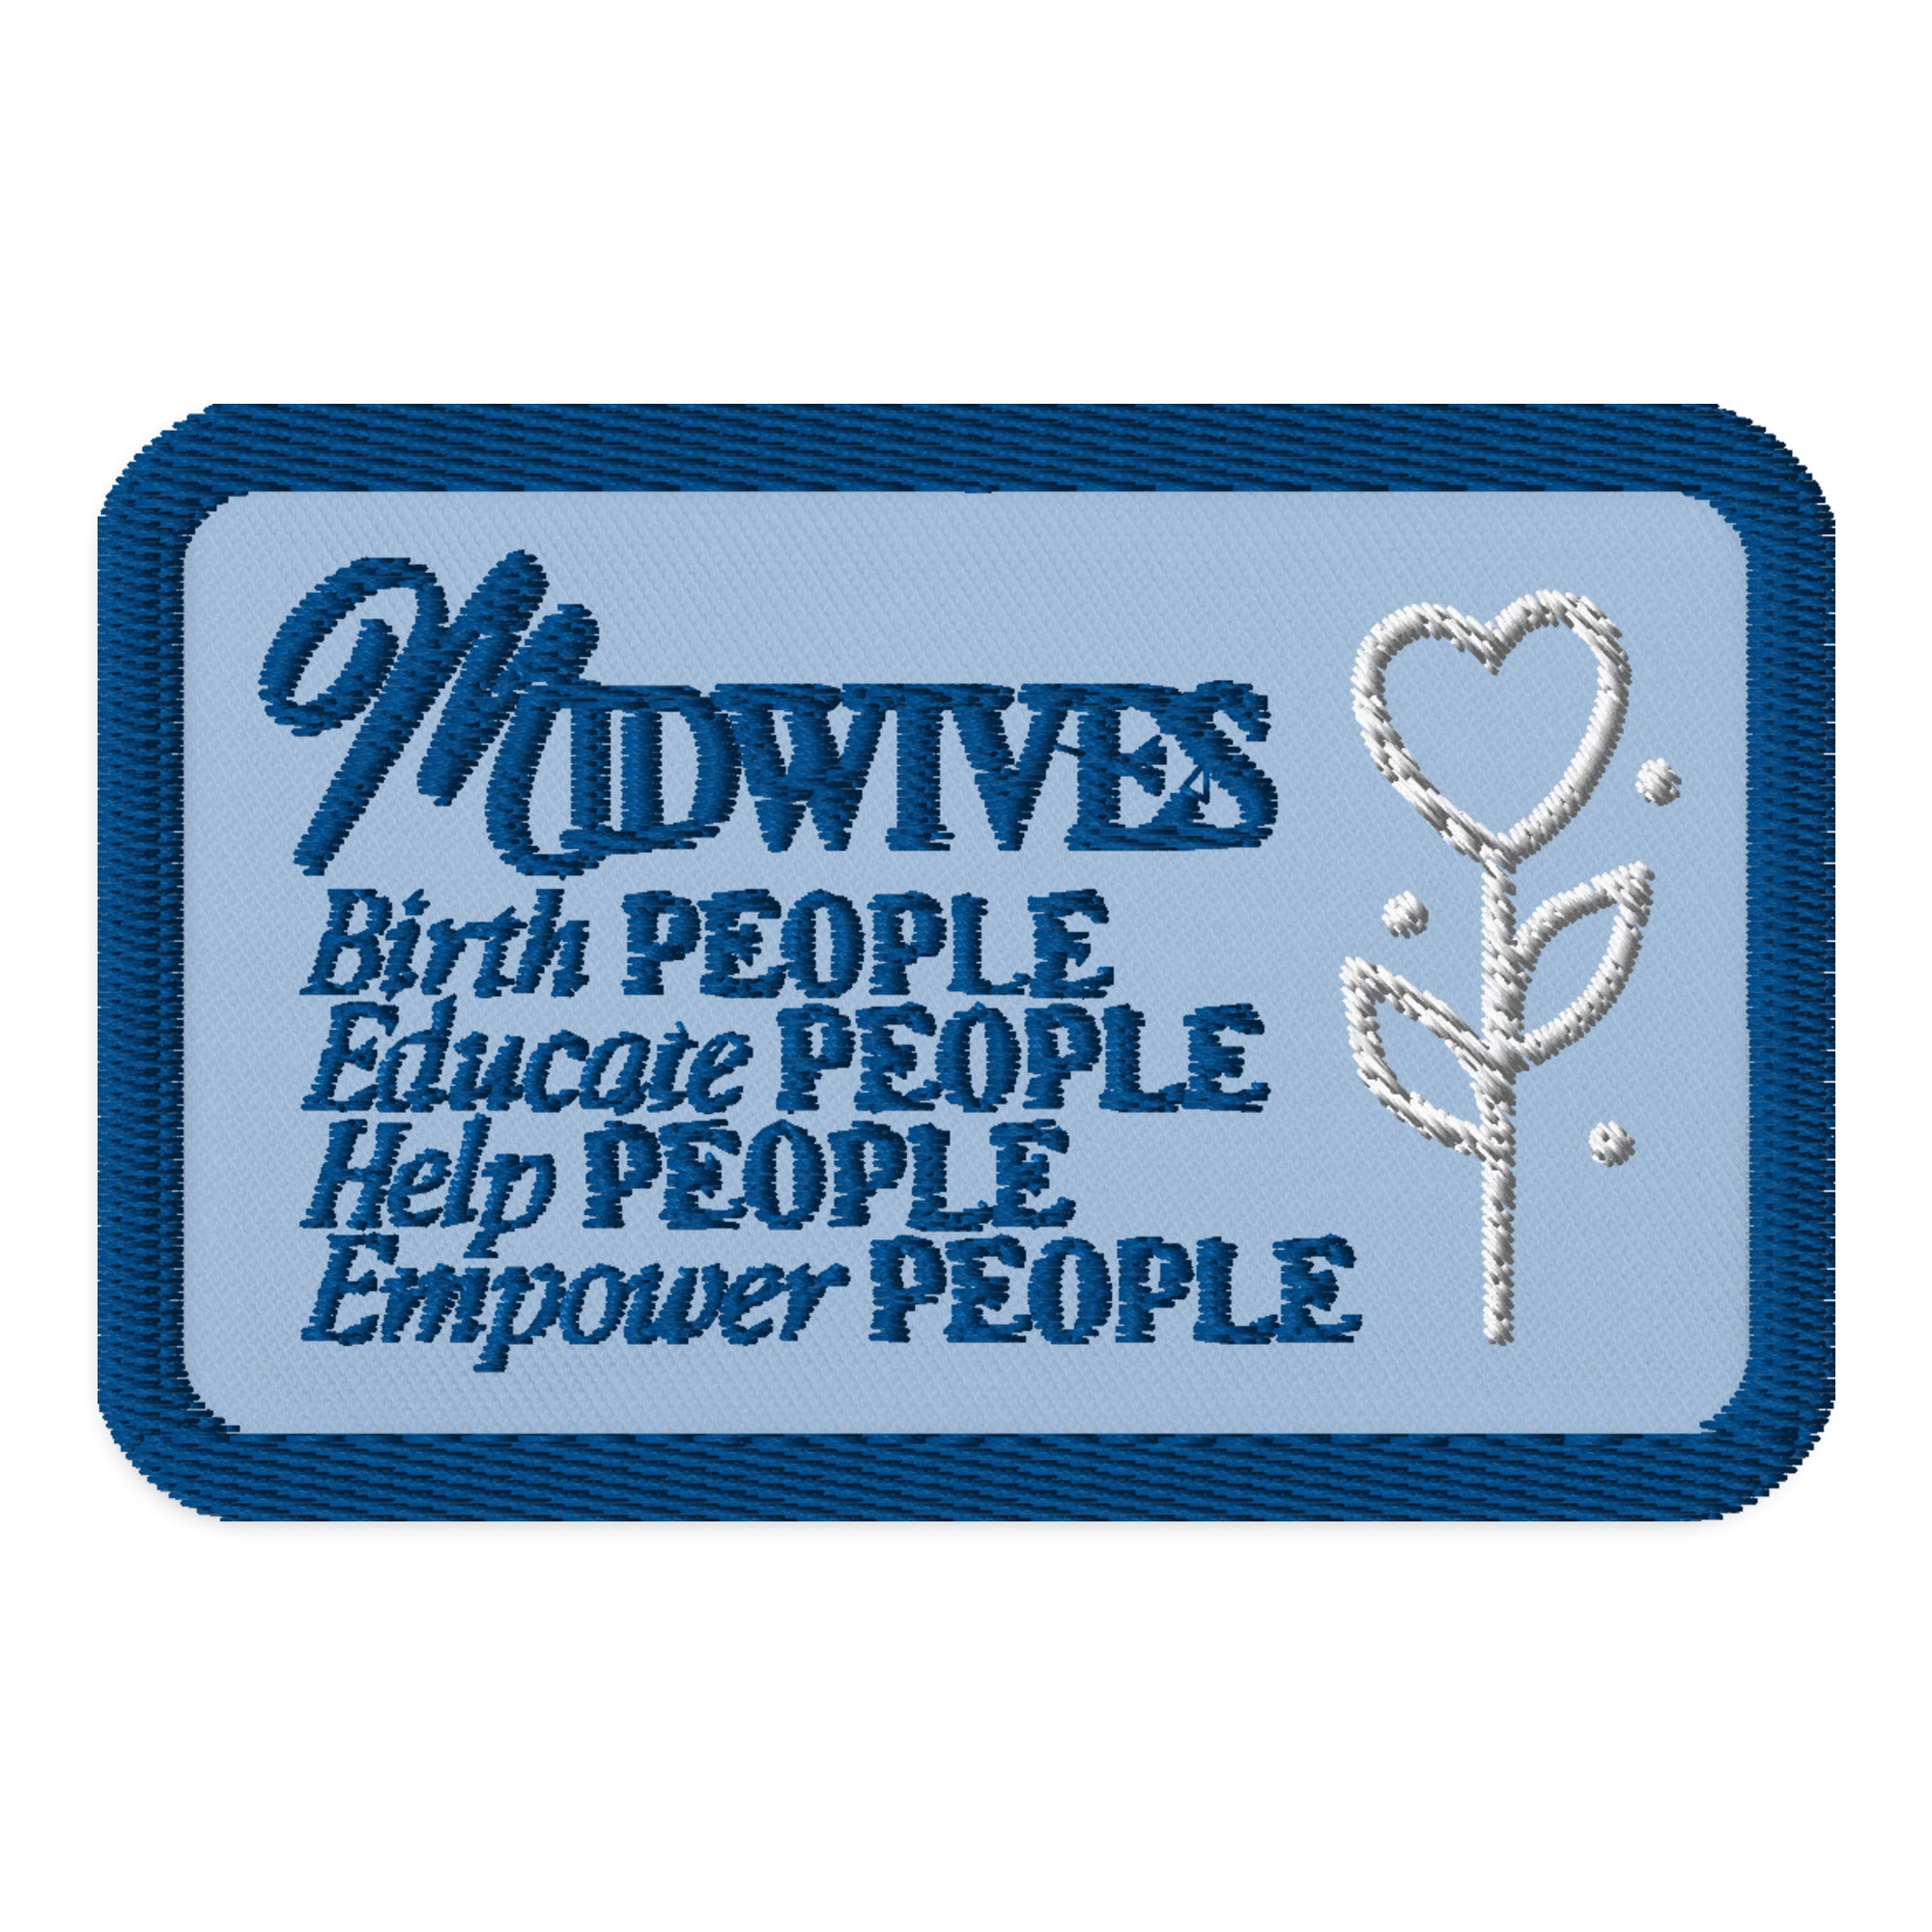 Midwives Patch